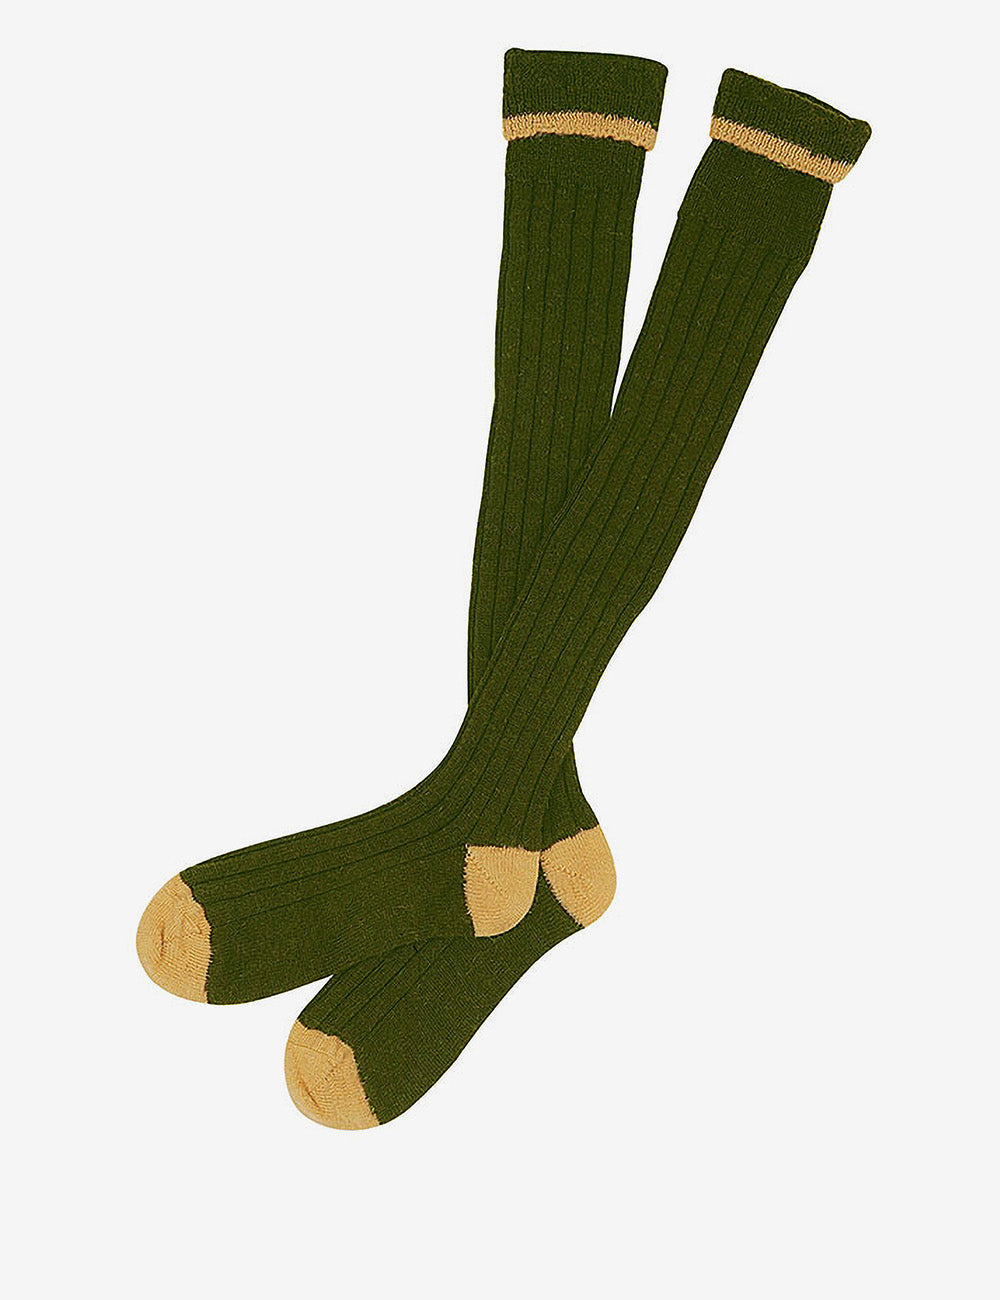 Barbour Contrast Gun Stockings - Olive/Gold